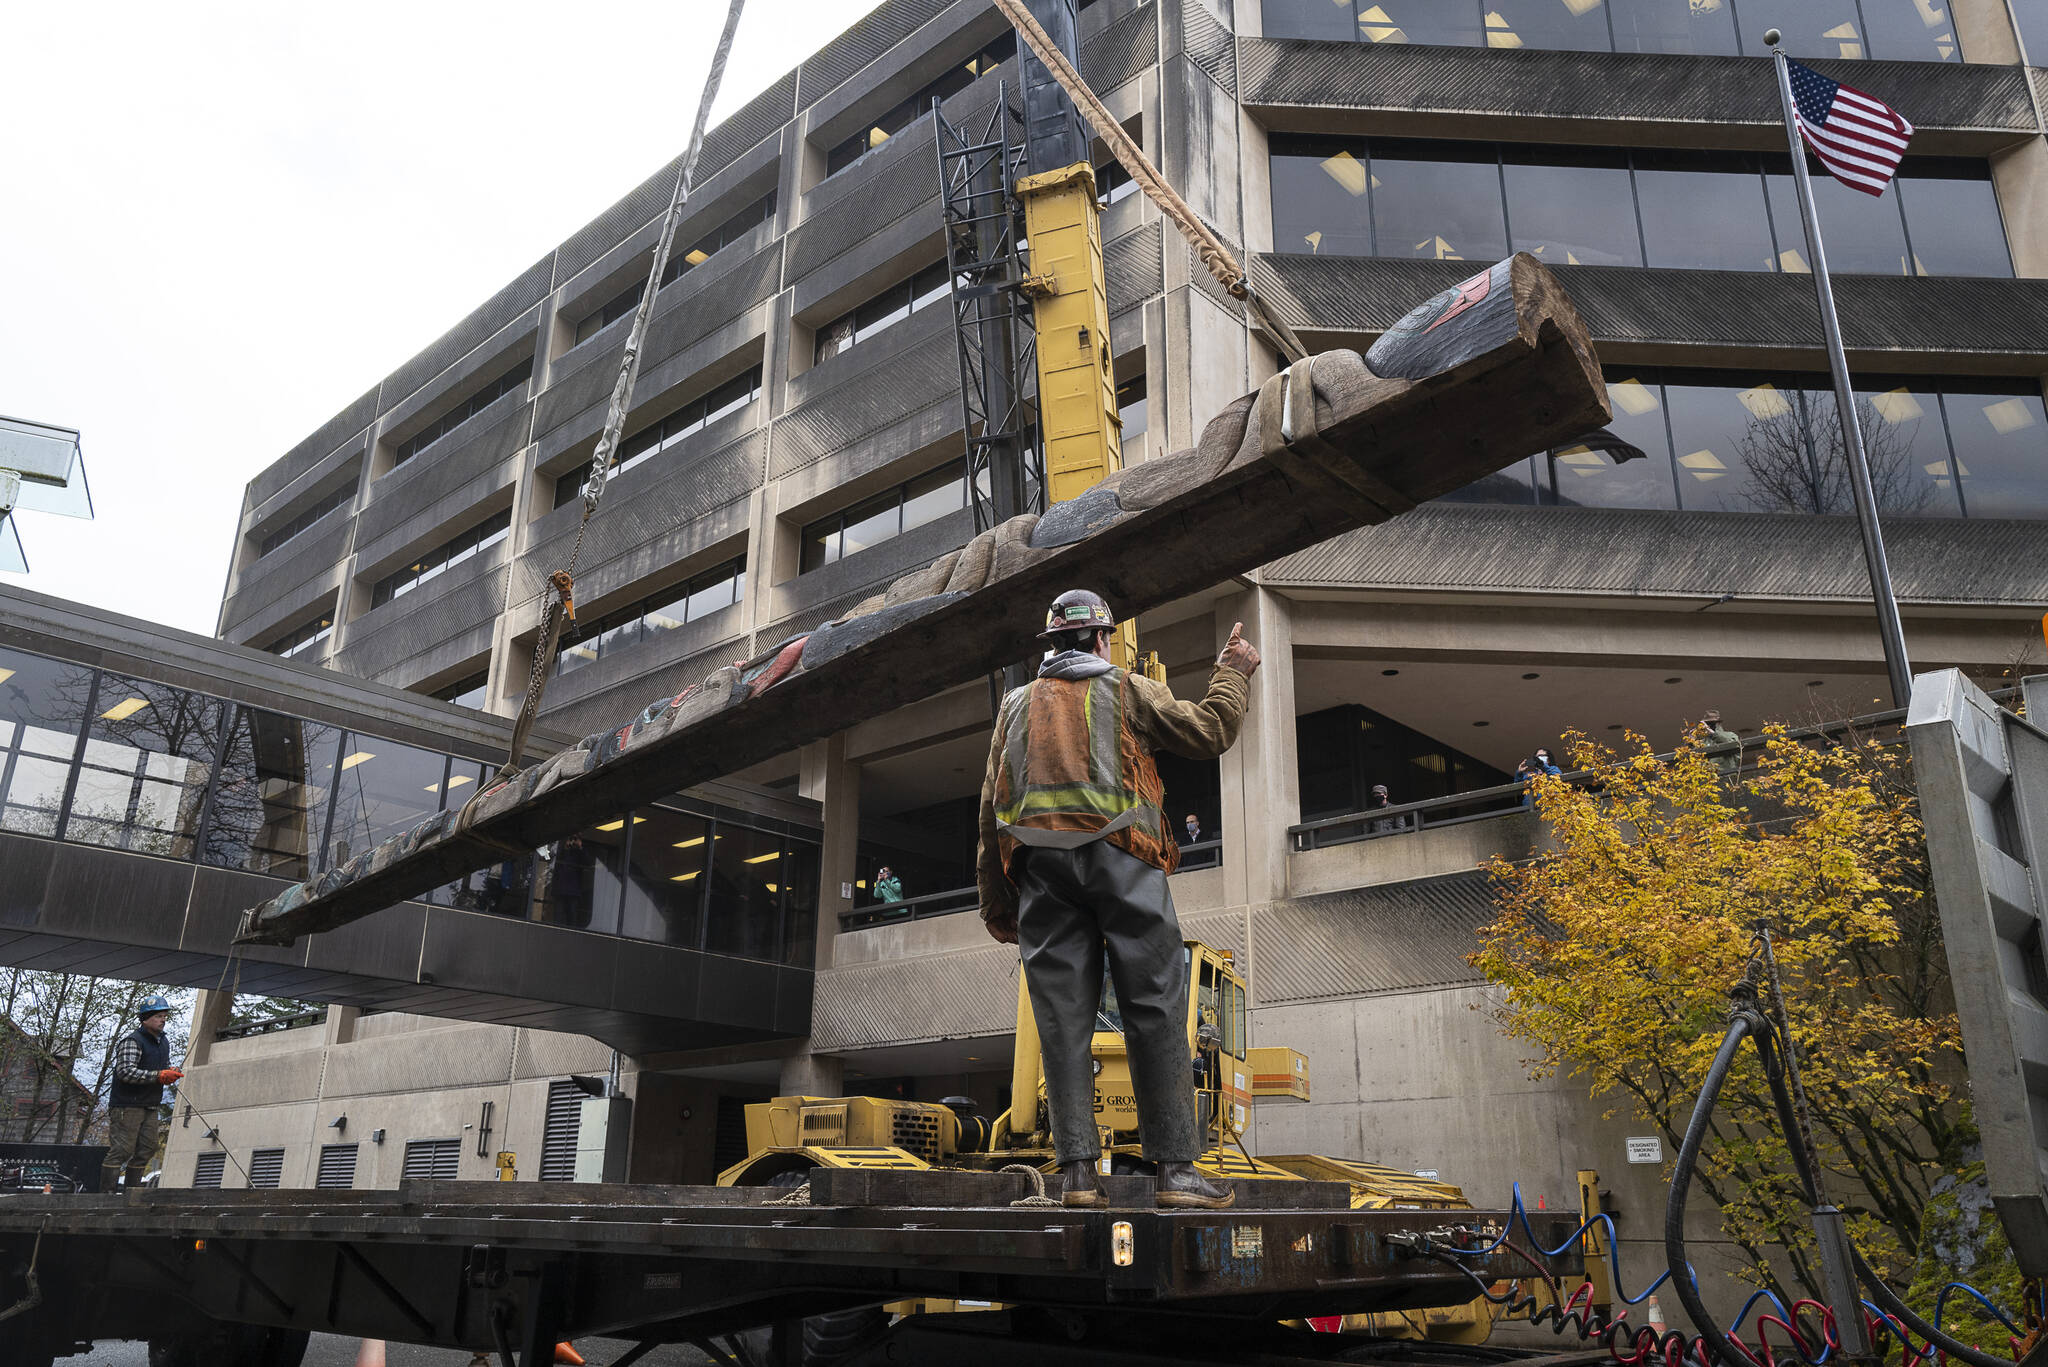 It took two forklifts, a large crane, a flatbed truck a team of workers to move the Wooshkeetaan Kootéeyaa (totem pole) to its new location inside the atrium of the State Office Building on Oct. 15. (Michael Penn / For the Jundeau-Douglas City Museum)